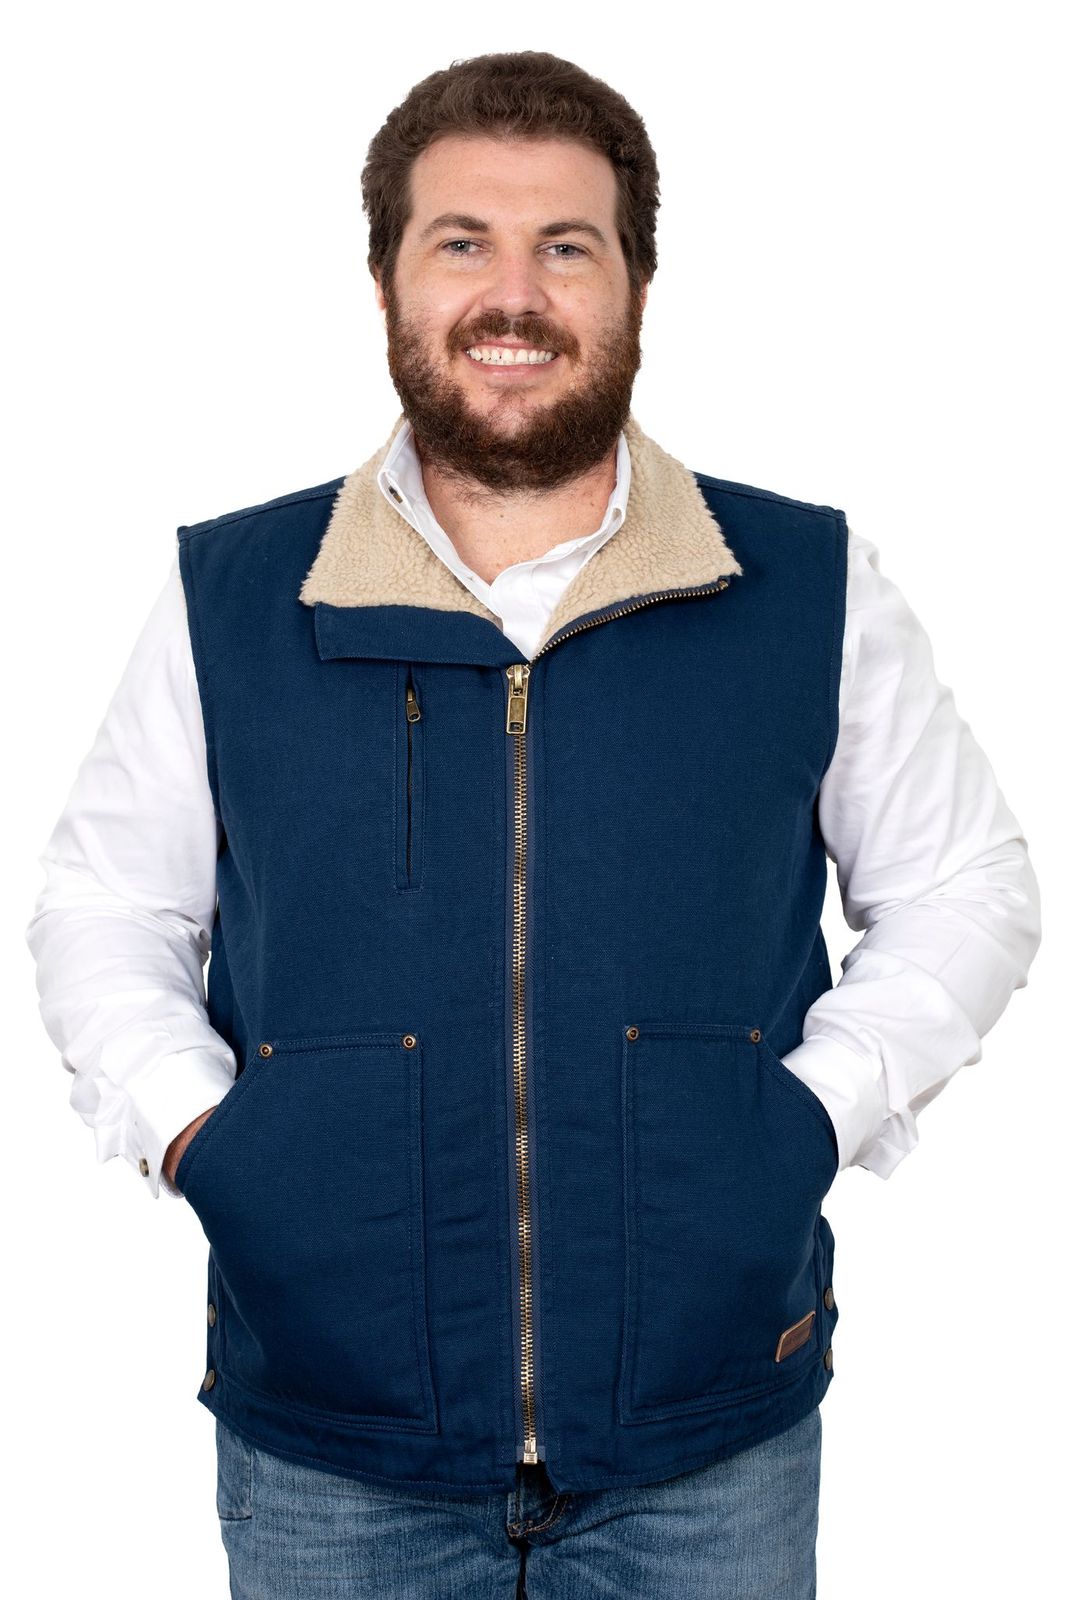 Just Country Mns Diamantina Sherpa Vest